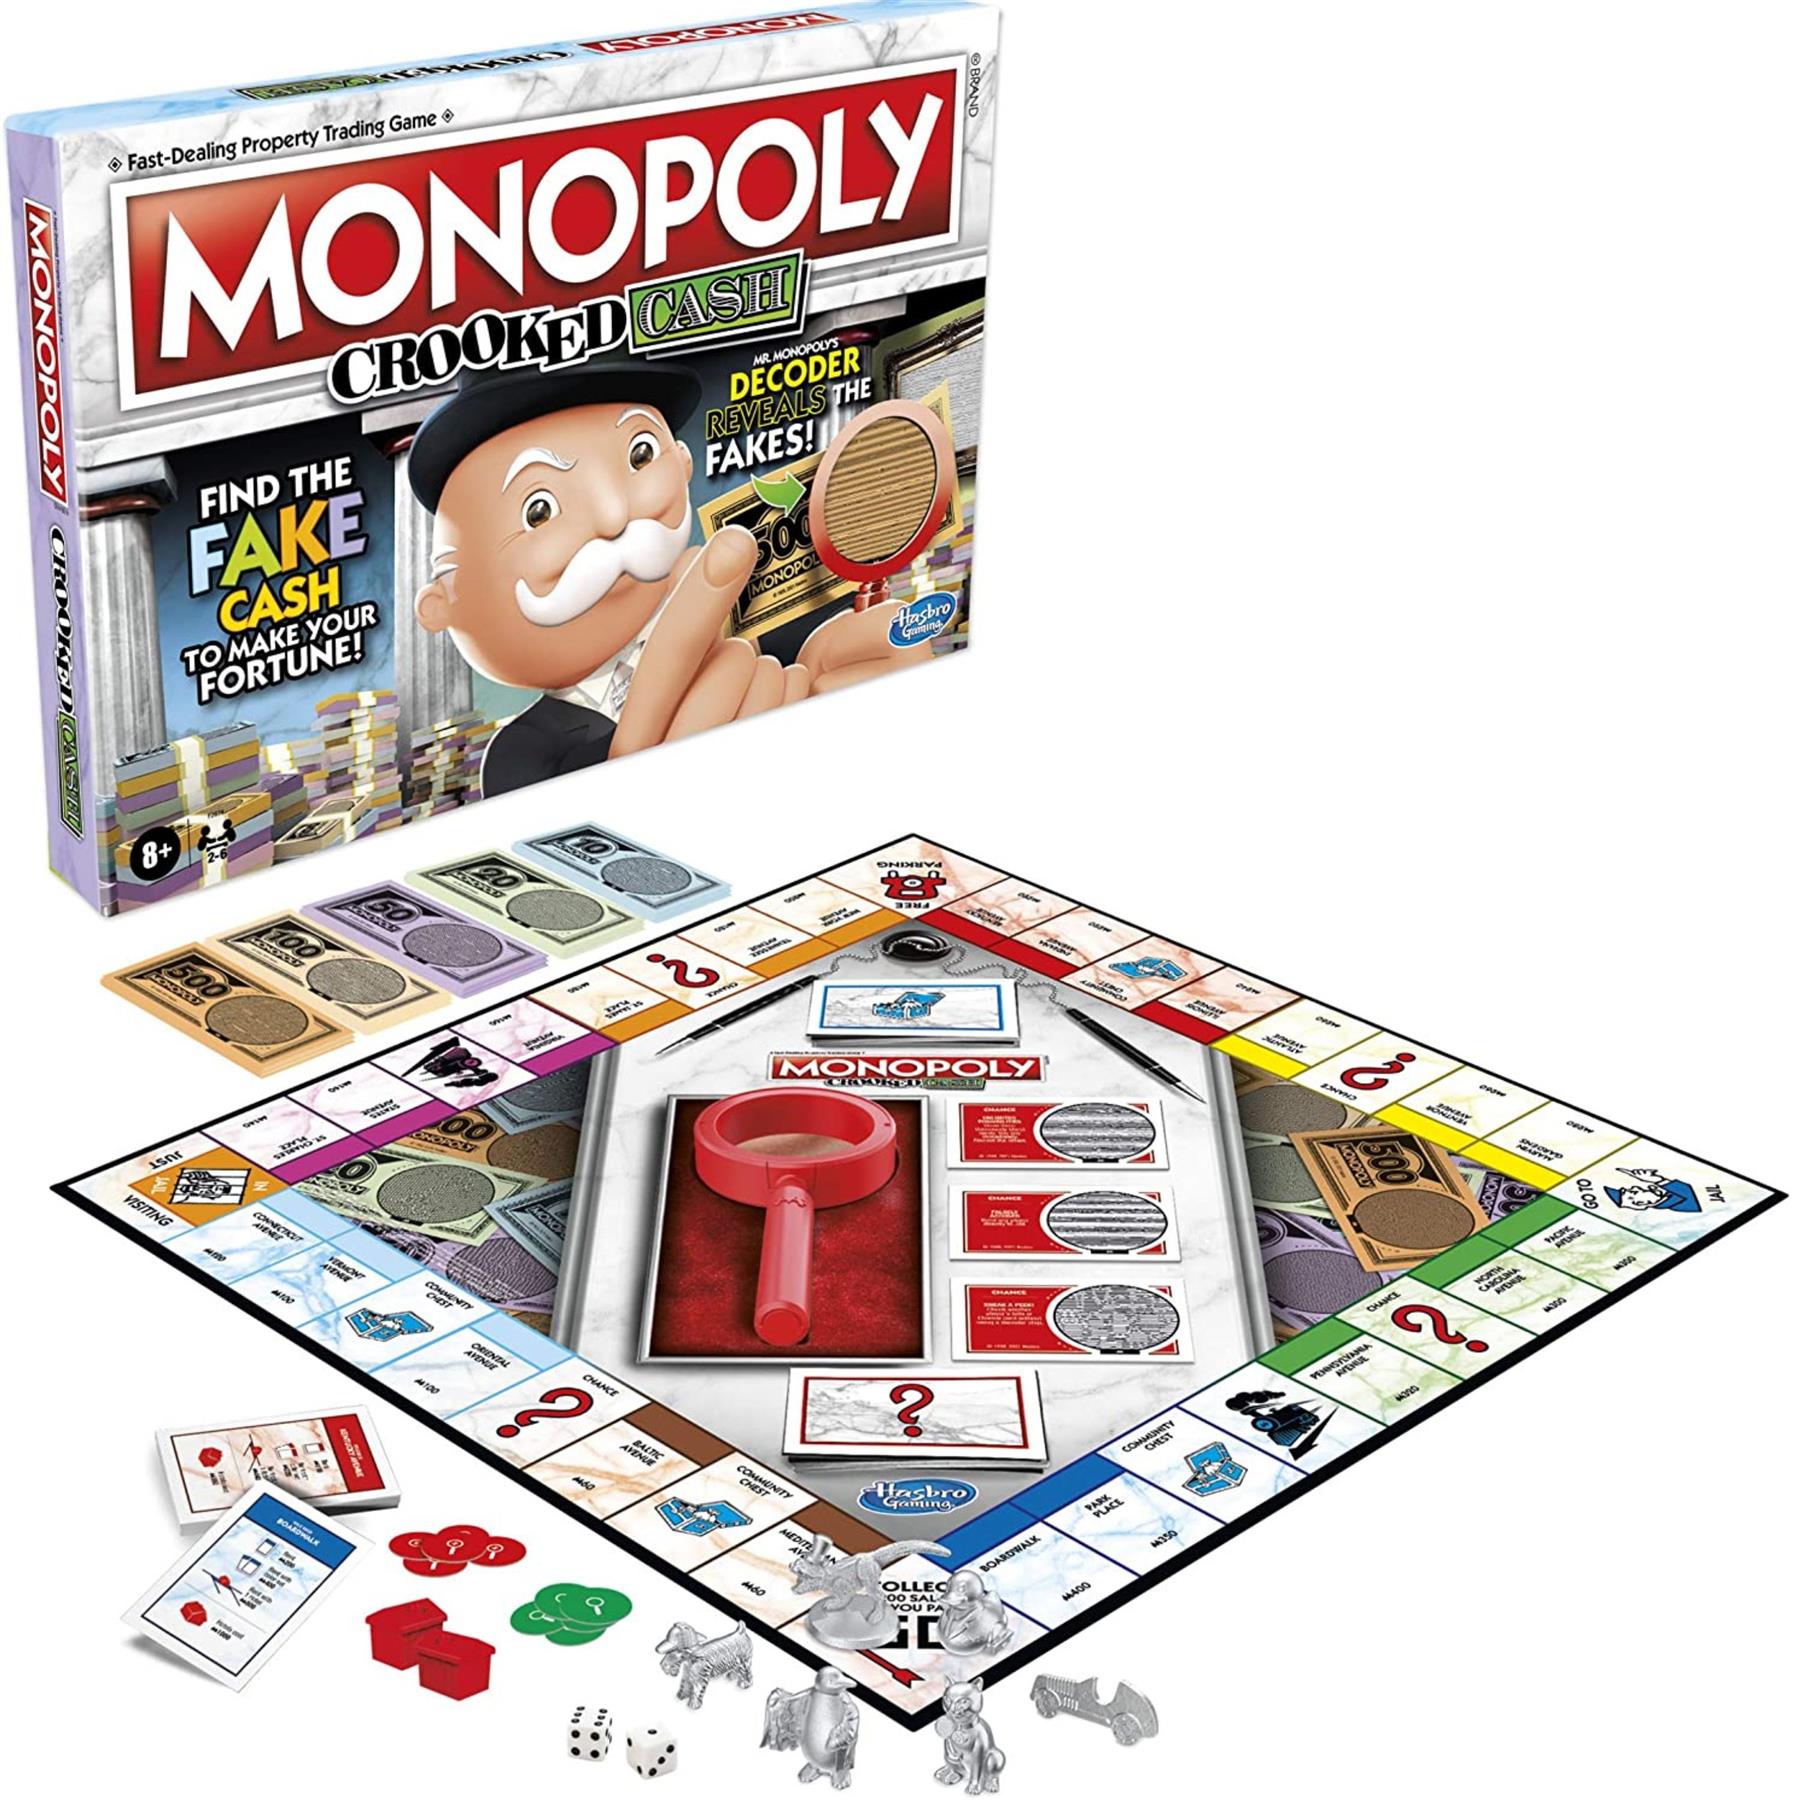 Monopoly Crooked Cash Edition Board game by Monopoly - UKBuyZone